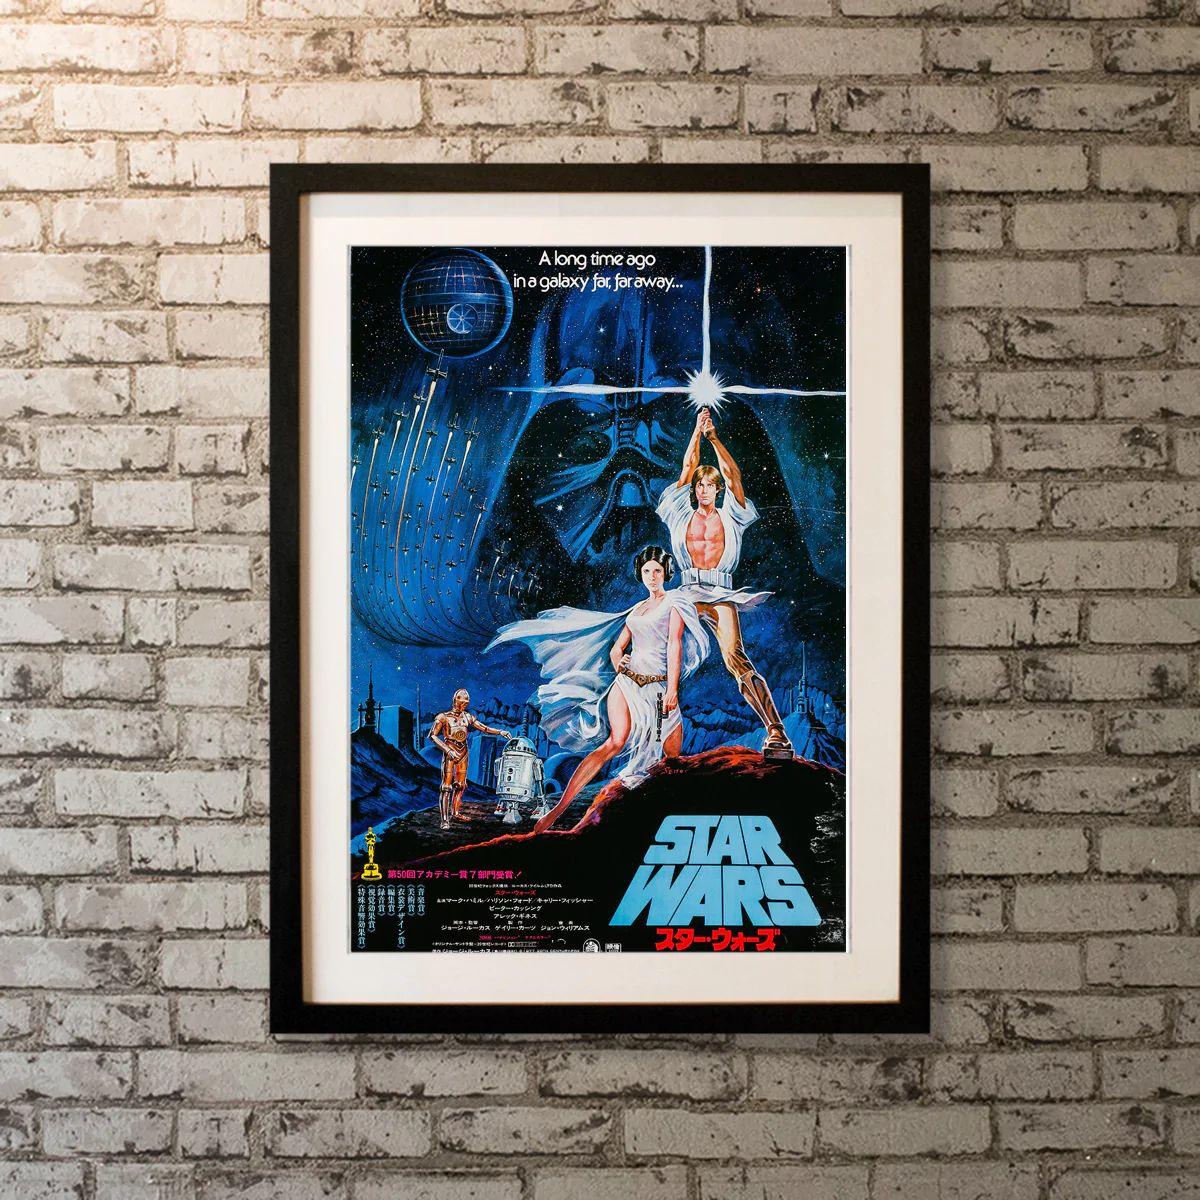 Star Wars, unframed poster. 1977.

Japanese B2 (20 X 29 Inches). Luke Skywalker joins forces with a Jedi Knight, a cocky pilot, a Wookiee and two droids to save the galaxy from the Empire's world-destroying battle station, while also attempting to